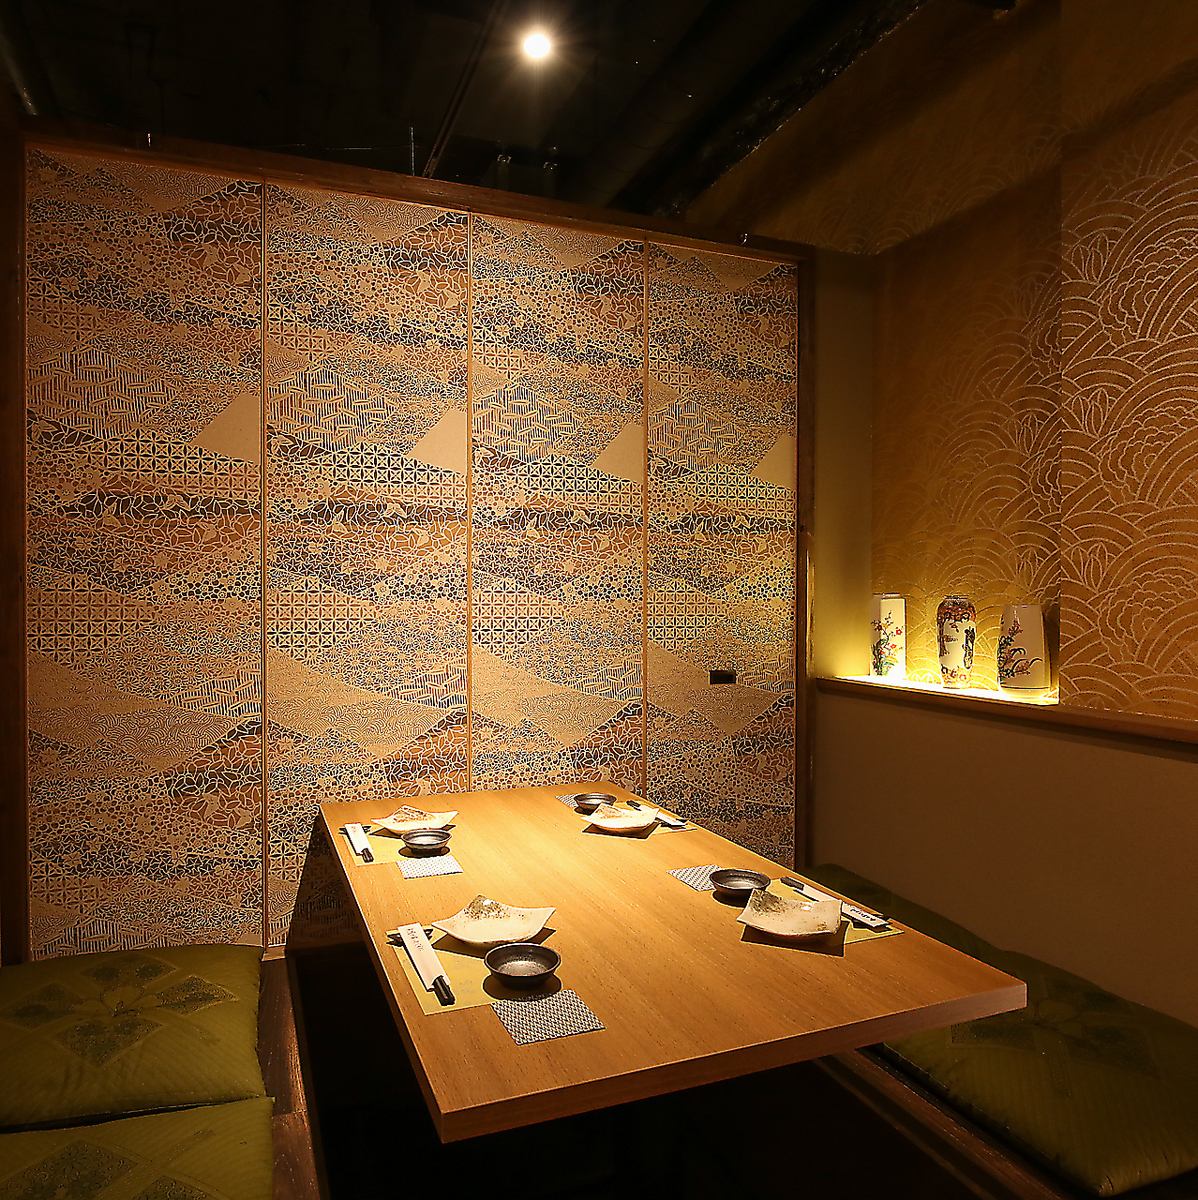 From 2 people to a private room with a horigotatsu table♪Dine in a private space♪